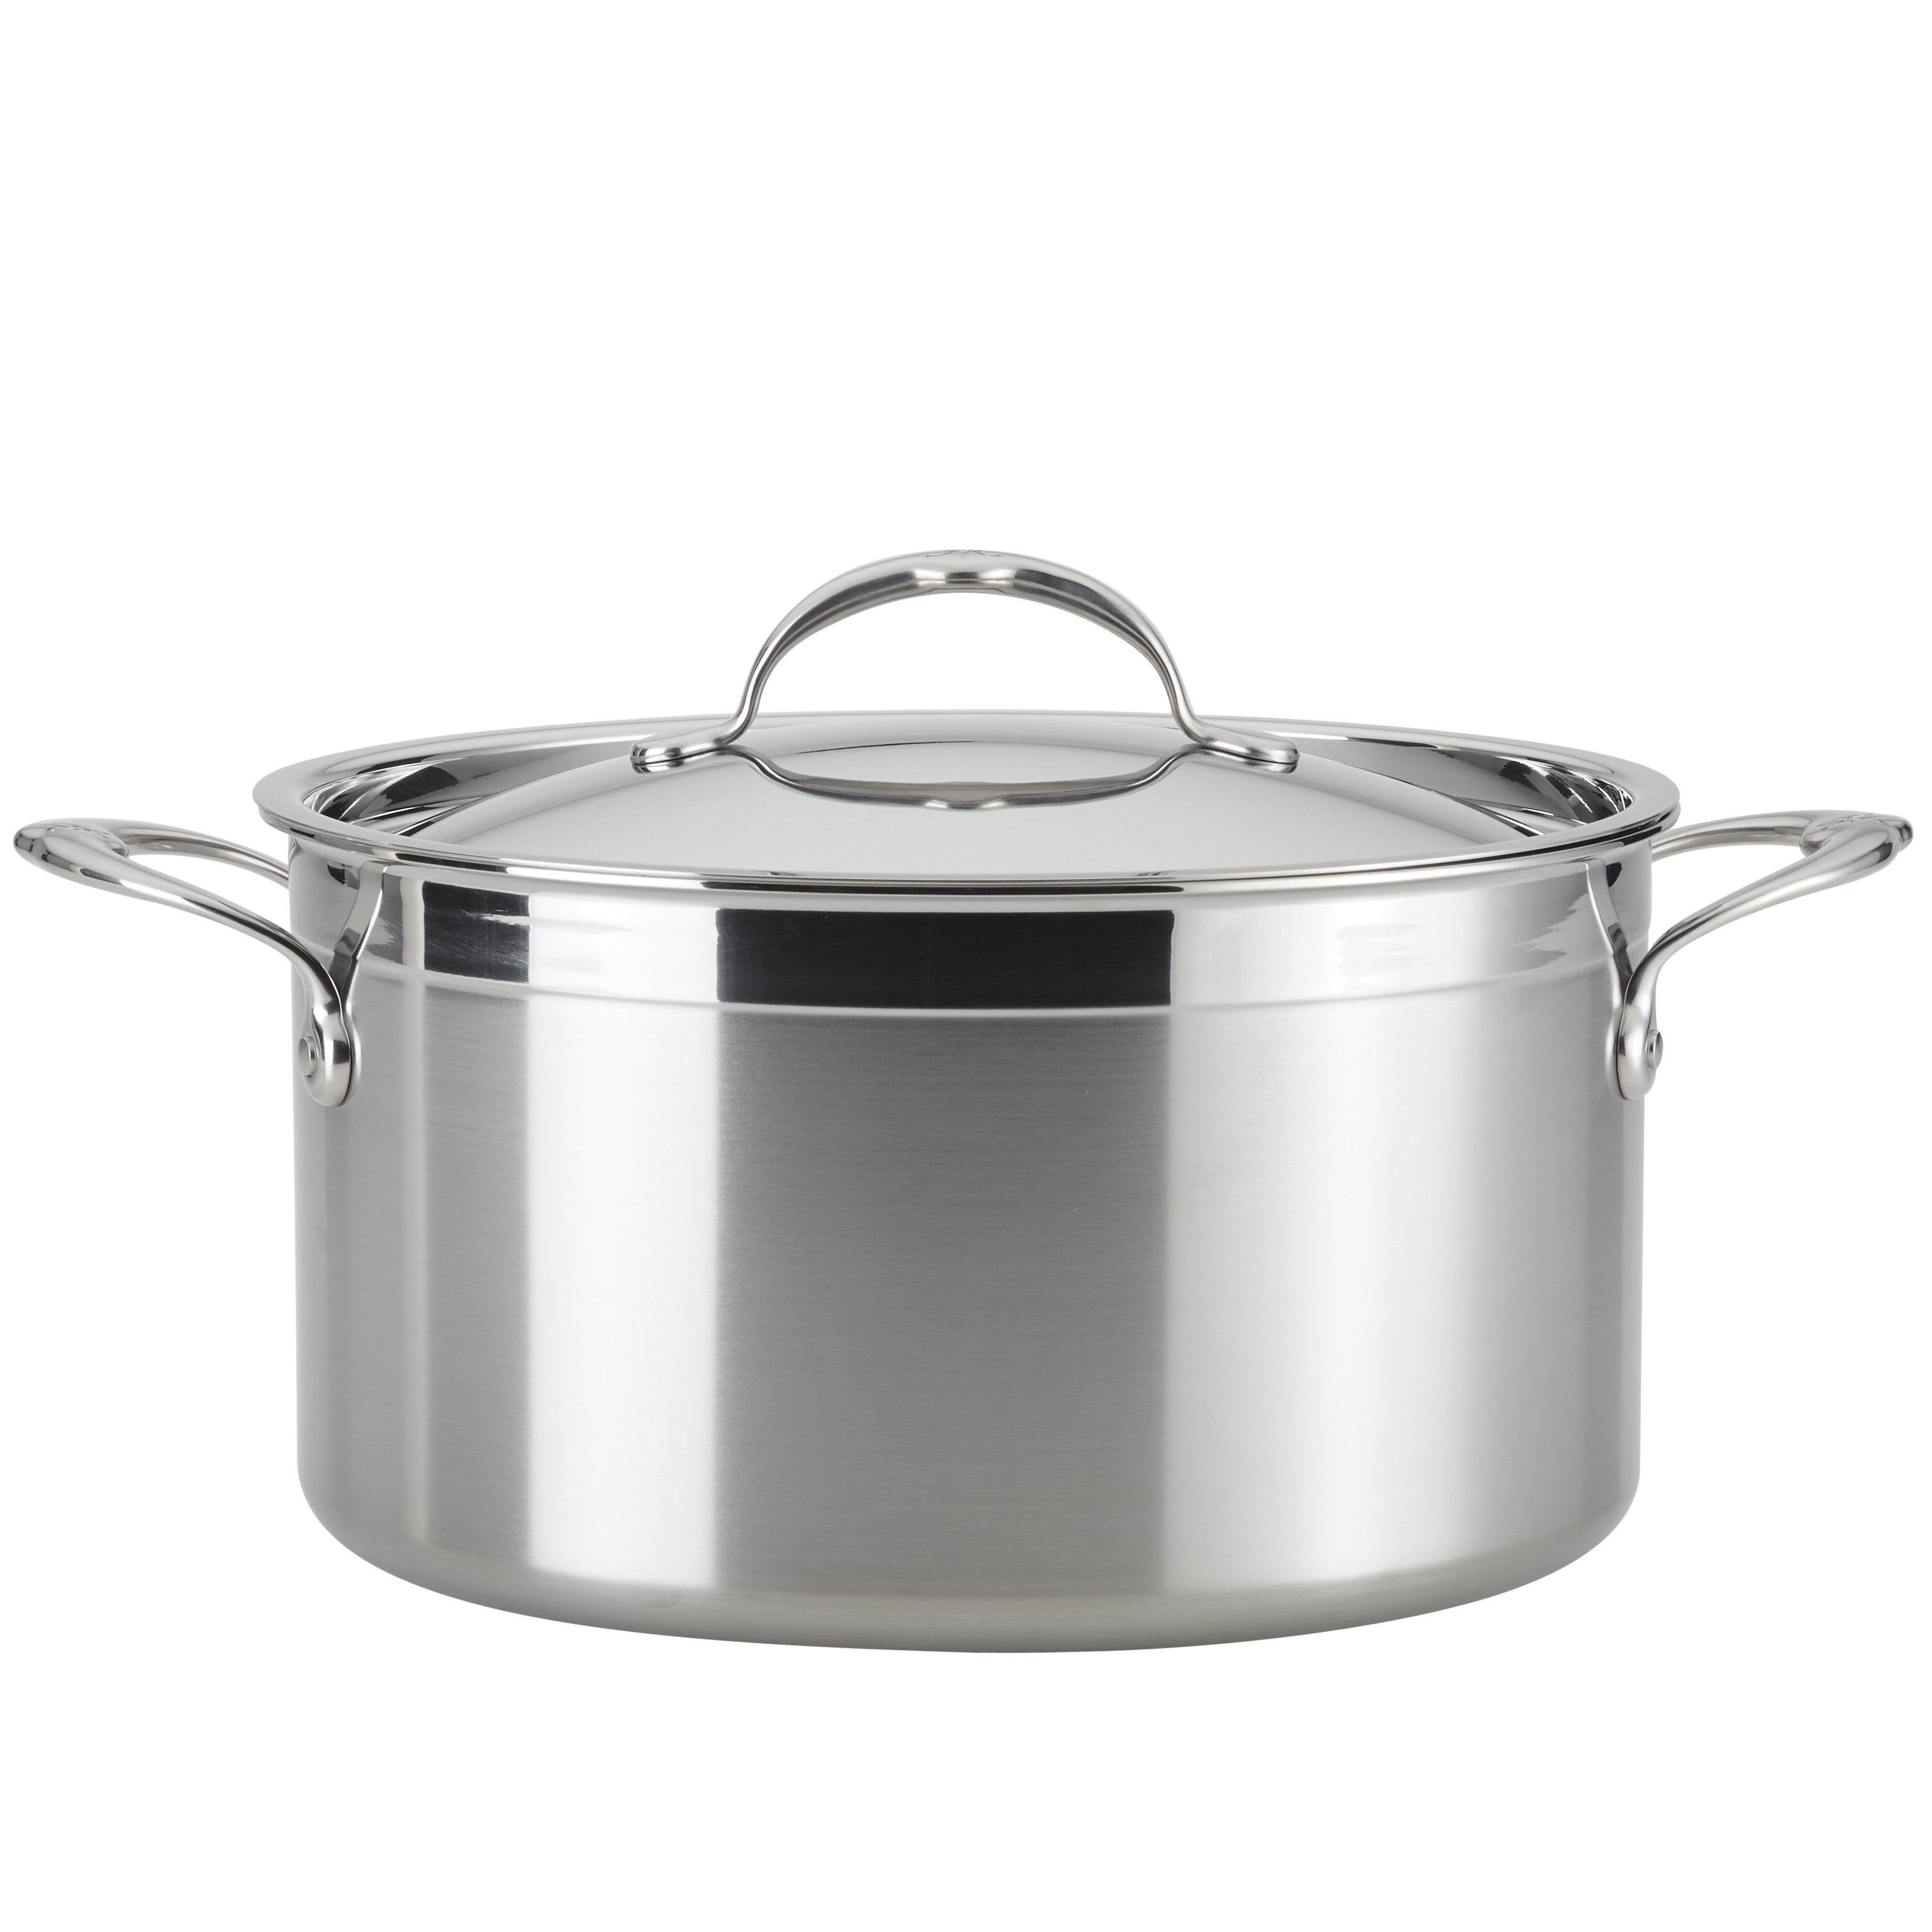 Made In Cookware - 8 Quart Stainless Steel Stock Pot With Lid - 5 Ply  Stainless Clad - Professional Cookware - Made in Italy - Induction  Compatible